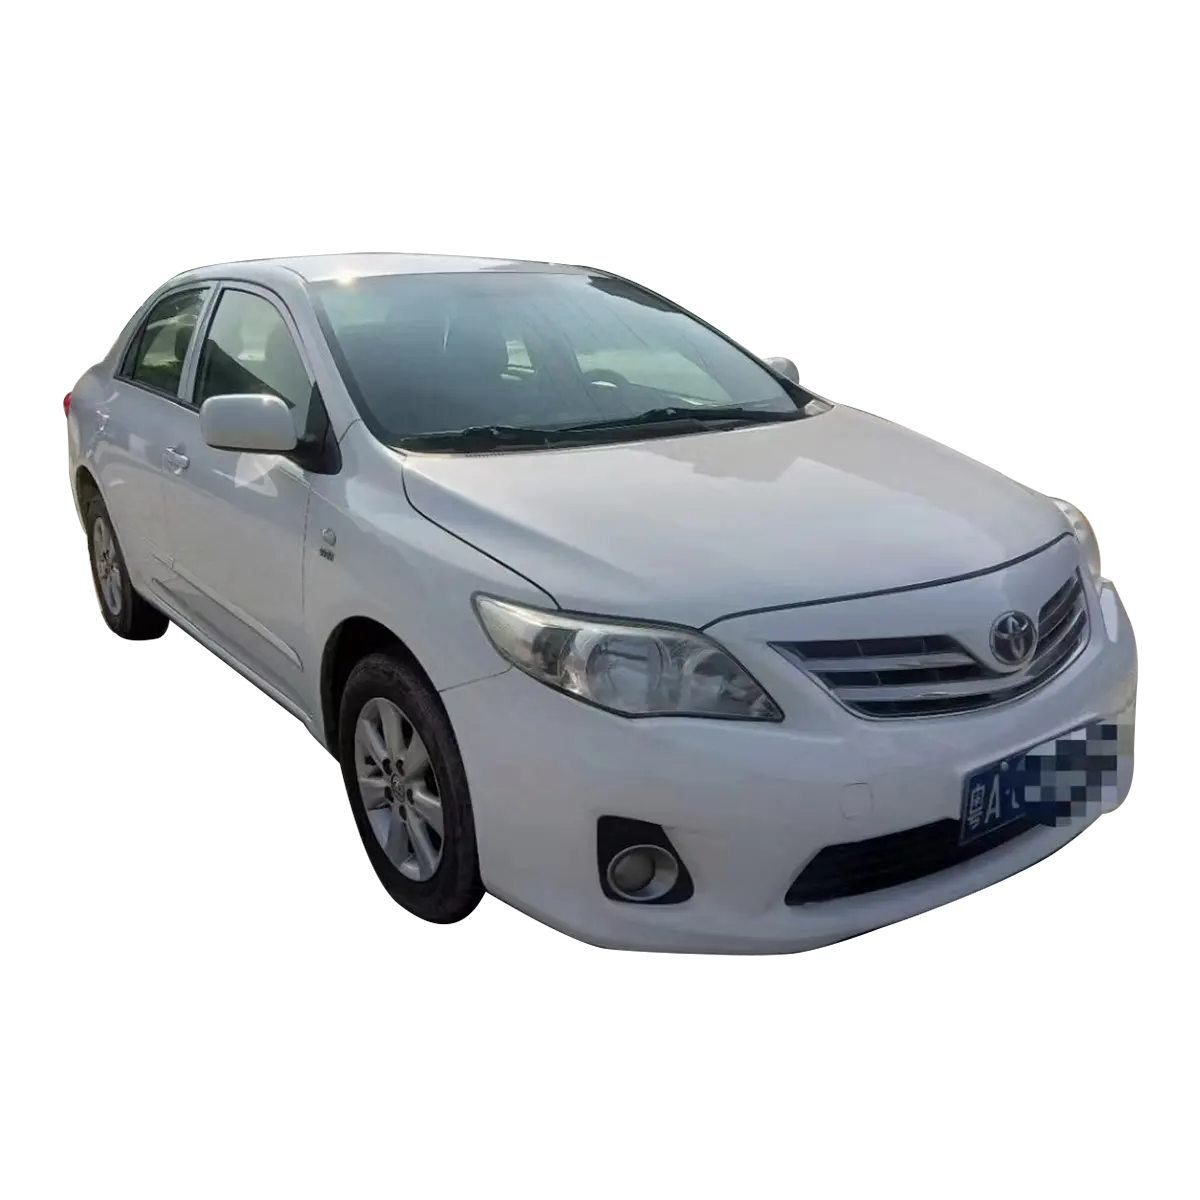 Best price 2004-2009 2007 Toyota Corolla verso 1.8L automatic GLX-i use cars for sale,second hand vehicles cheap cars